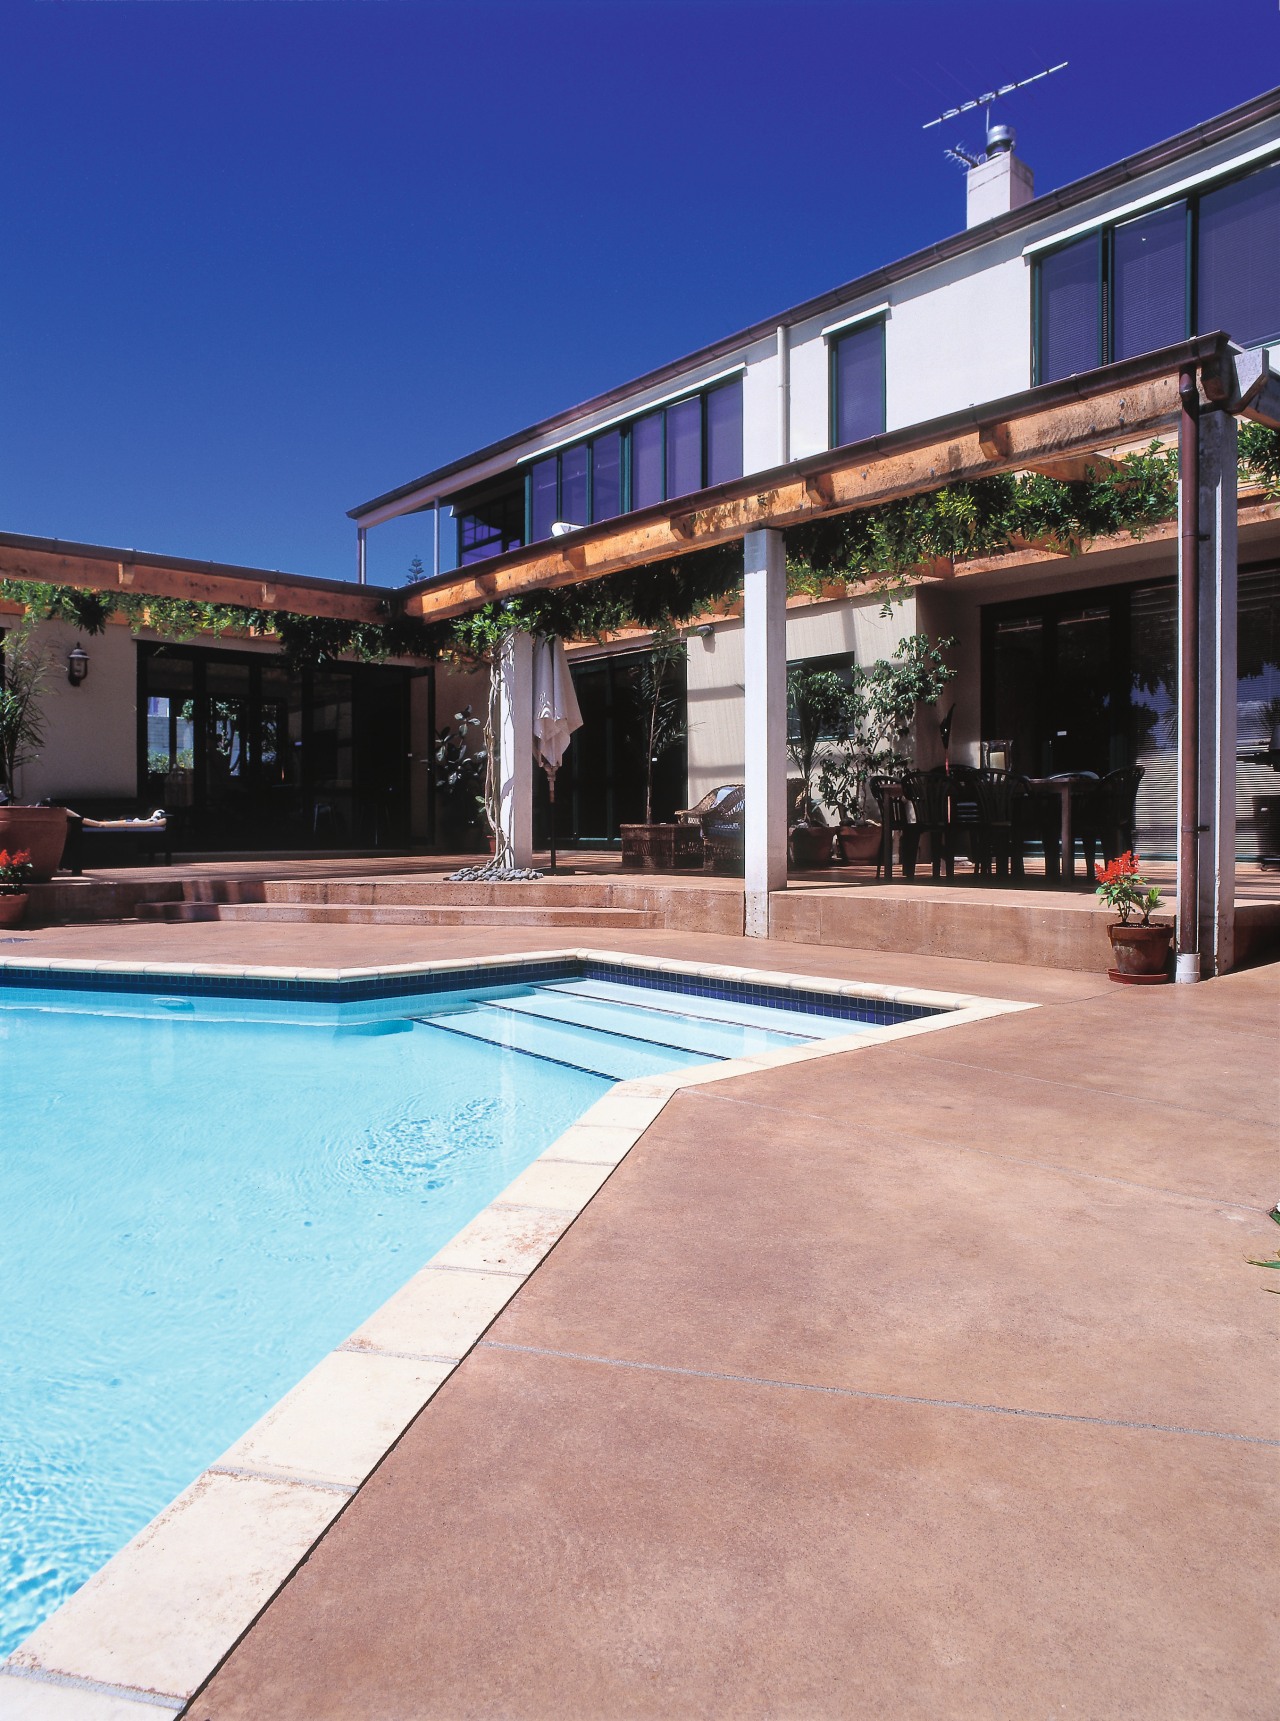 Outdoor pool area with coloured concrete paving, pergola estate, house, leisure, leisure centre, property, real estate, residential area, swimming pool, orange, blue